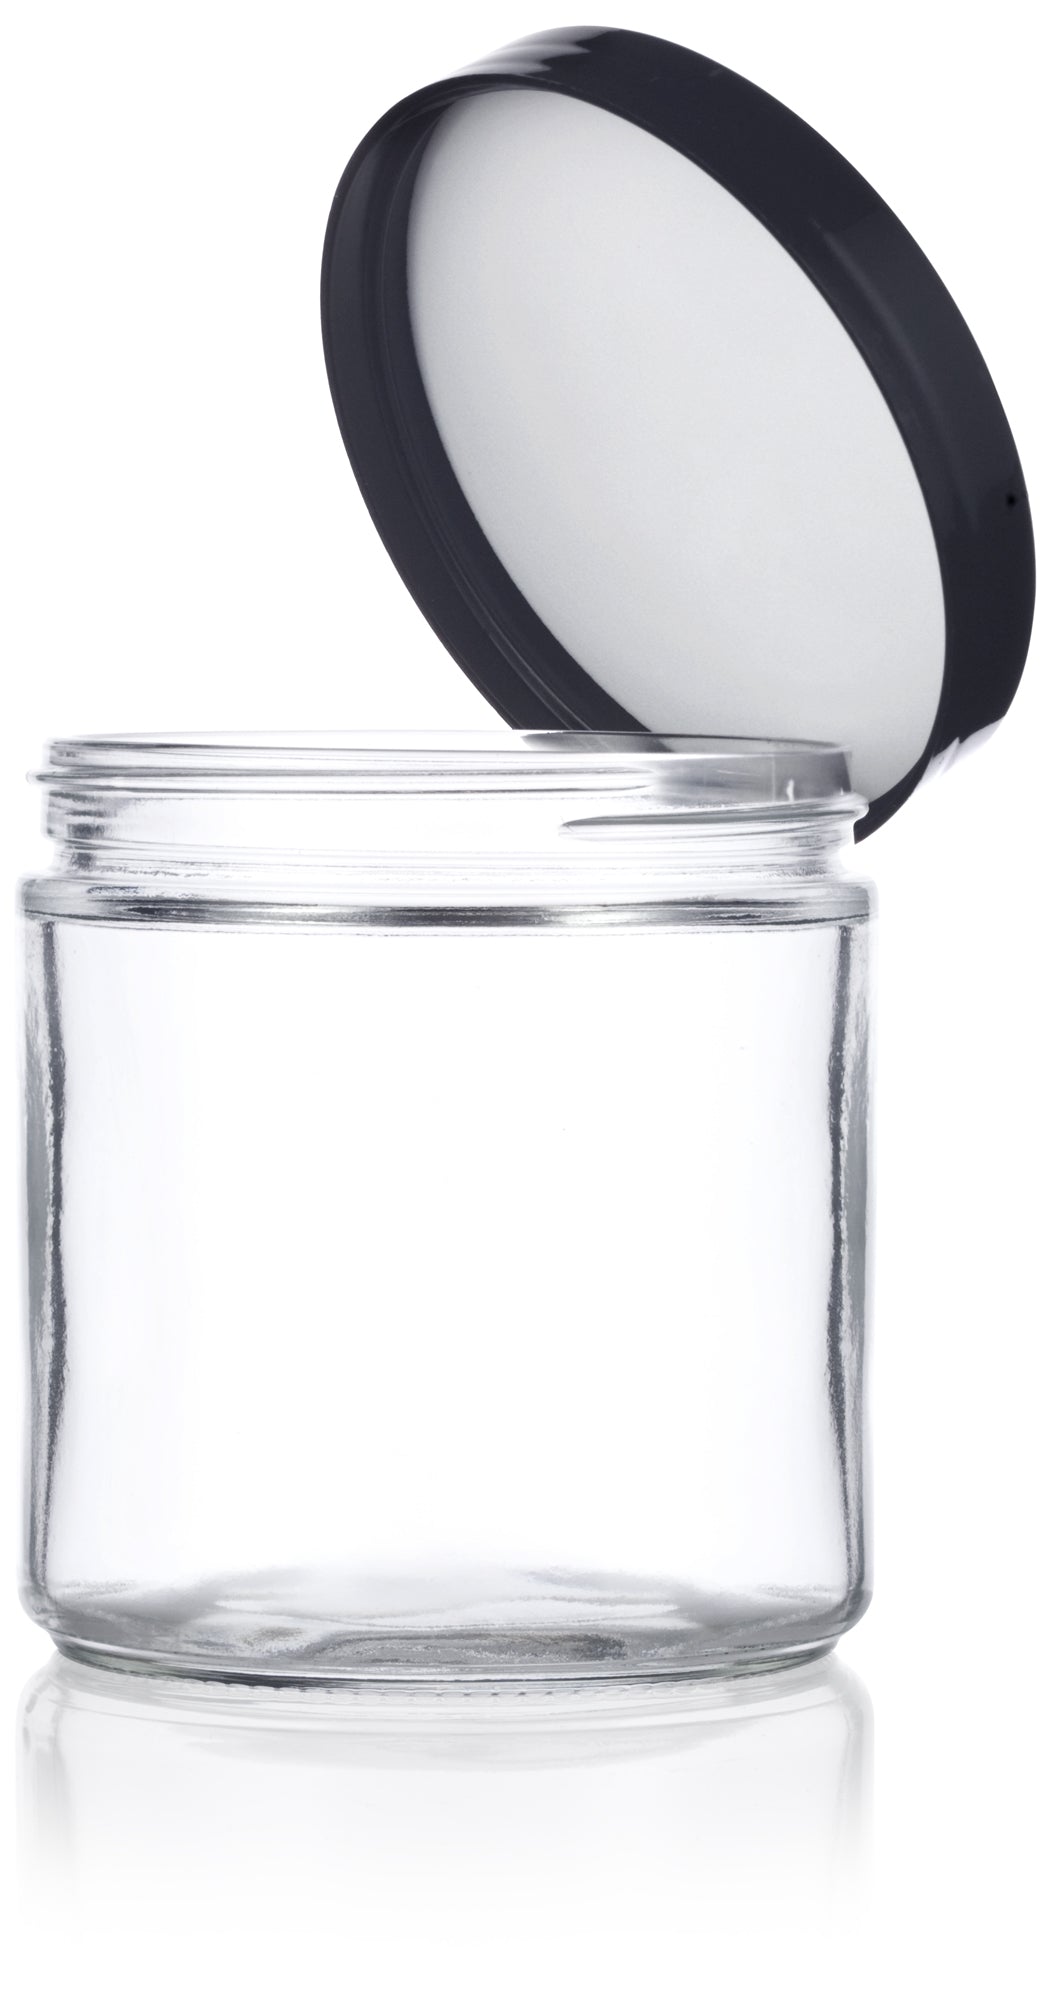 Straight Sided 4 oz. Clear Glass Candle/Salve Jar per 24